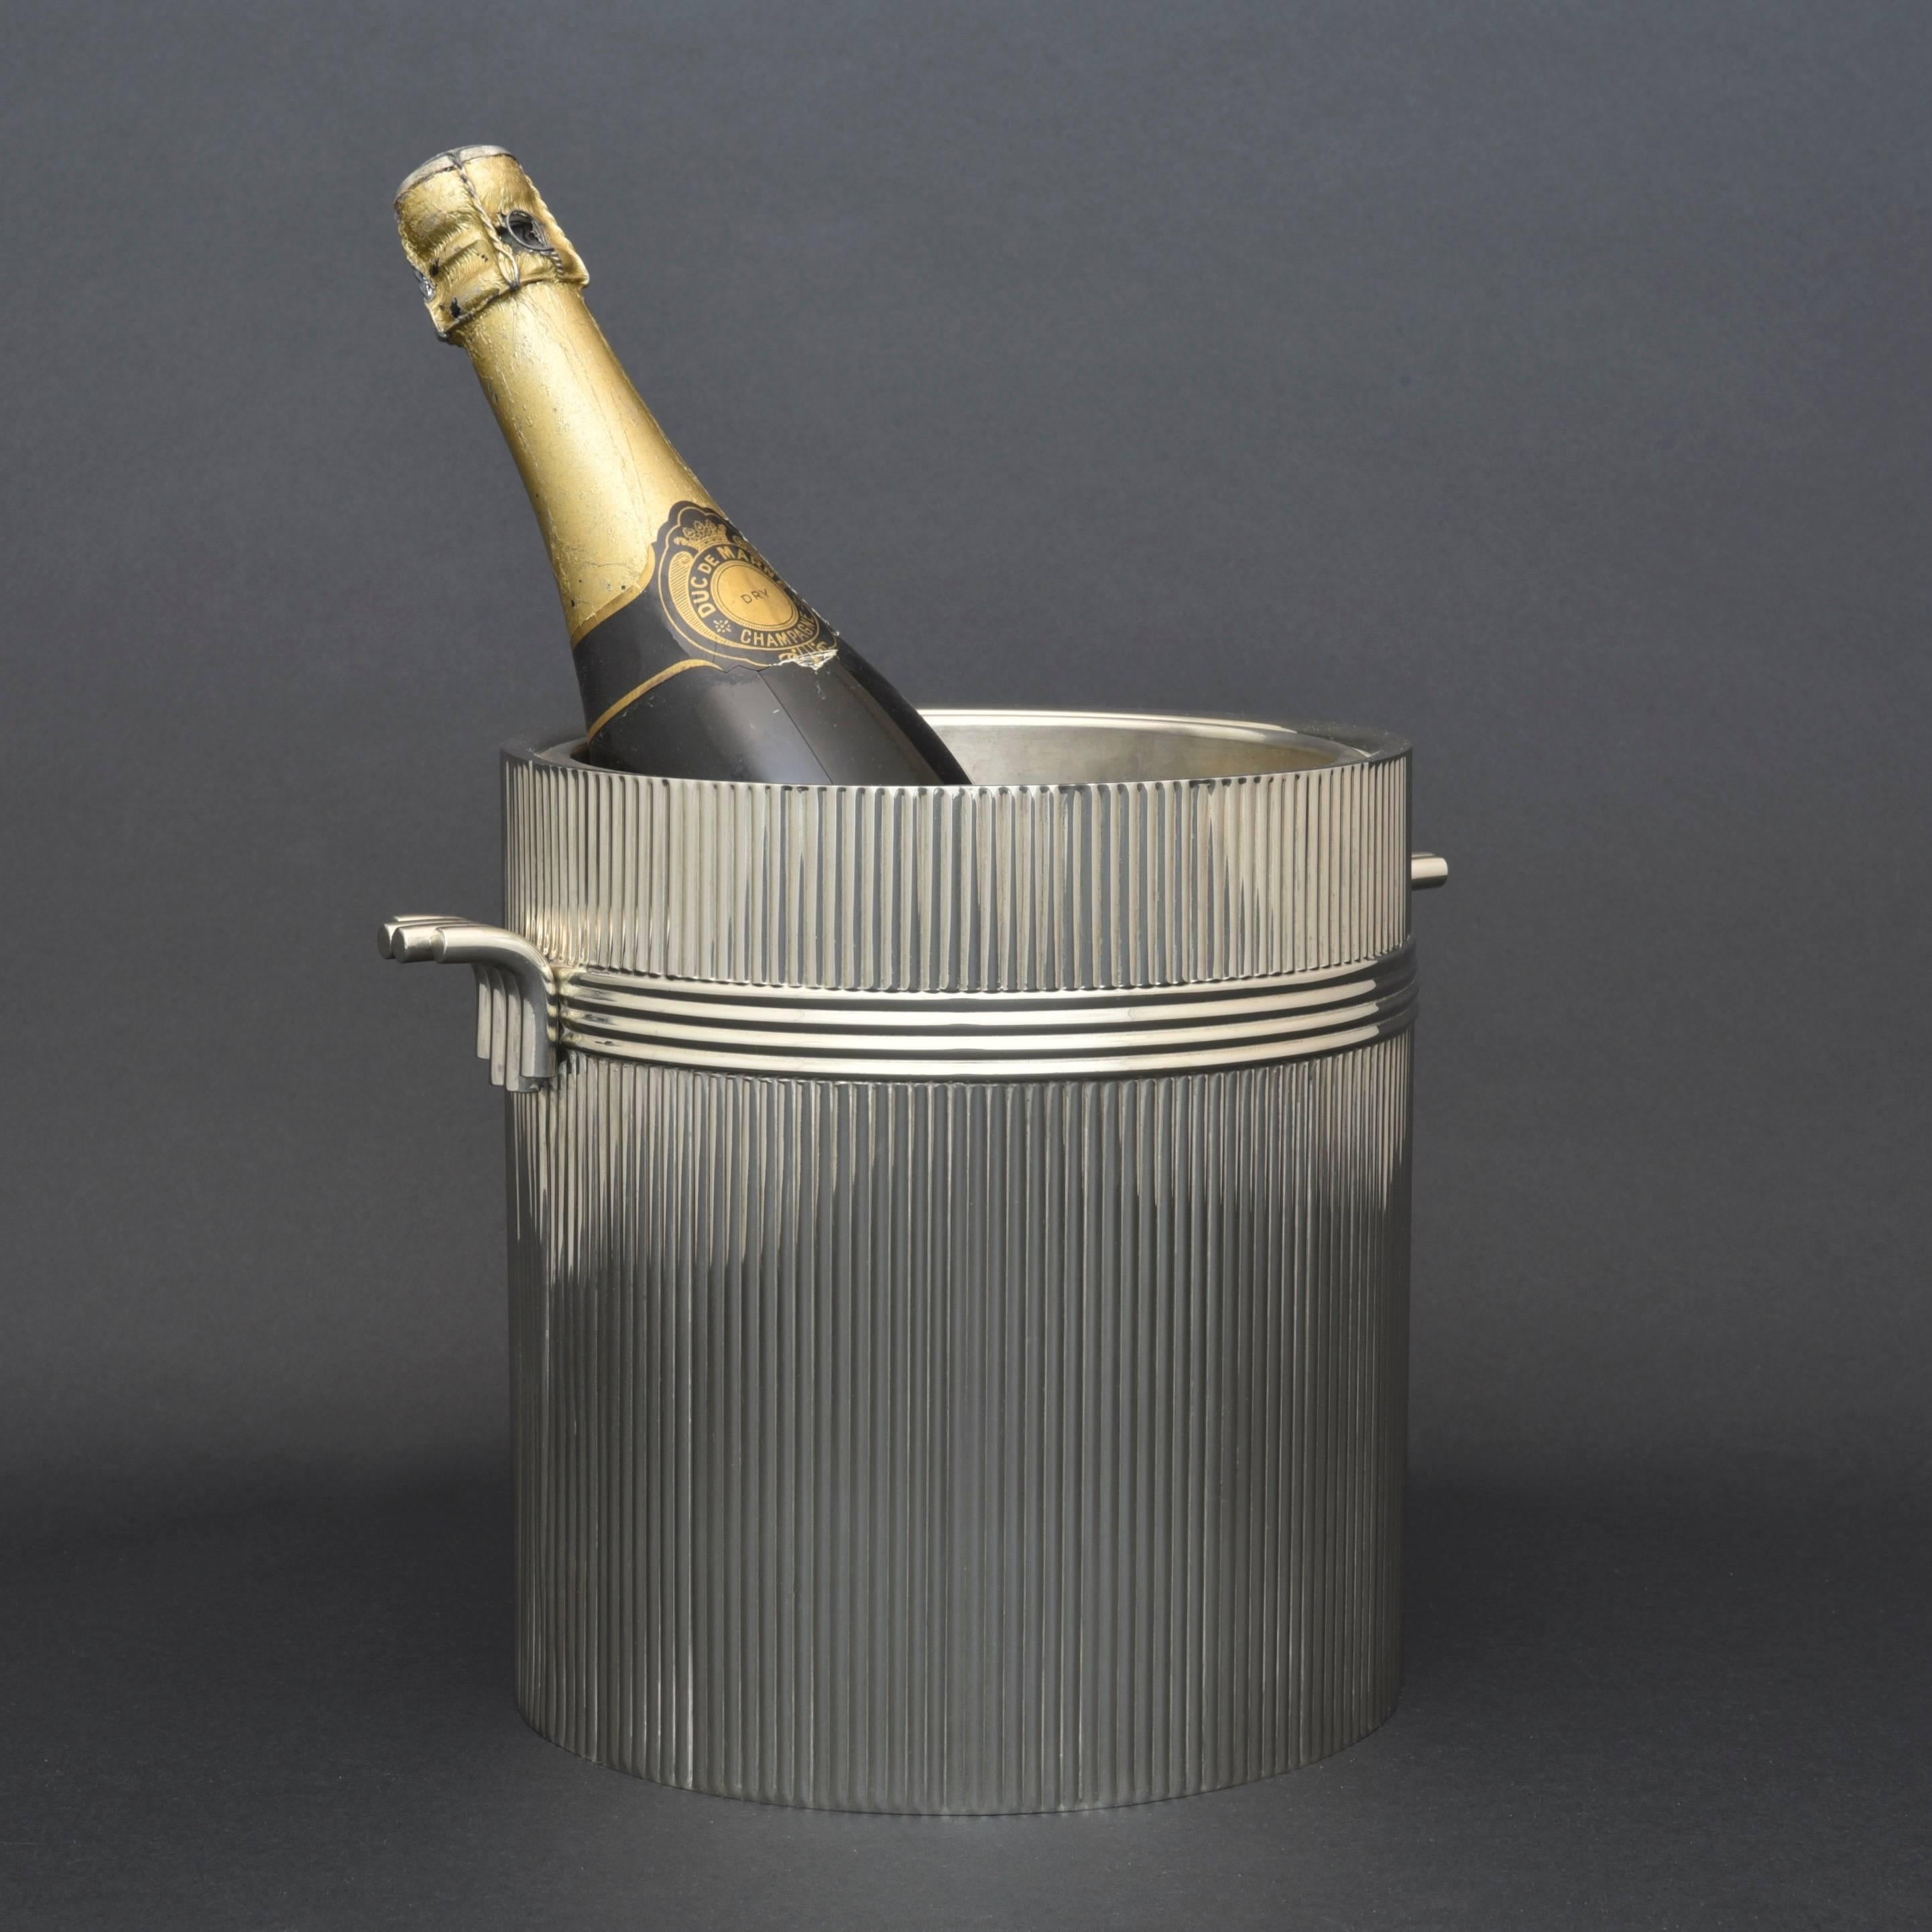 Stylish silver plated midcentury wine cooler by Christian Dior. Made to a fluted cylindrical design. Manufactured in France, in the 1970s and marked underneath, 'Christian Dior'.

Dimensions: 21 cm/8¼ inches (height) x 20 cm/8 inches (external